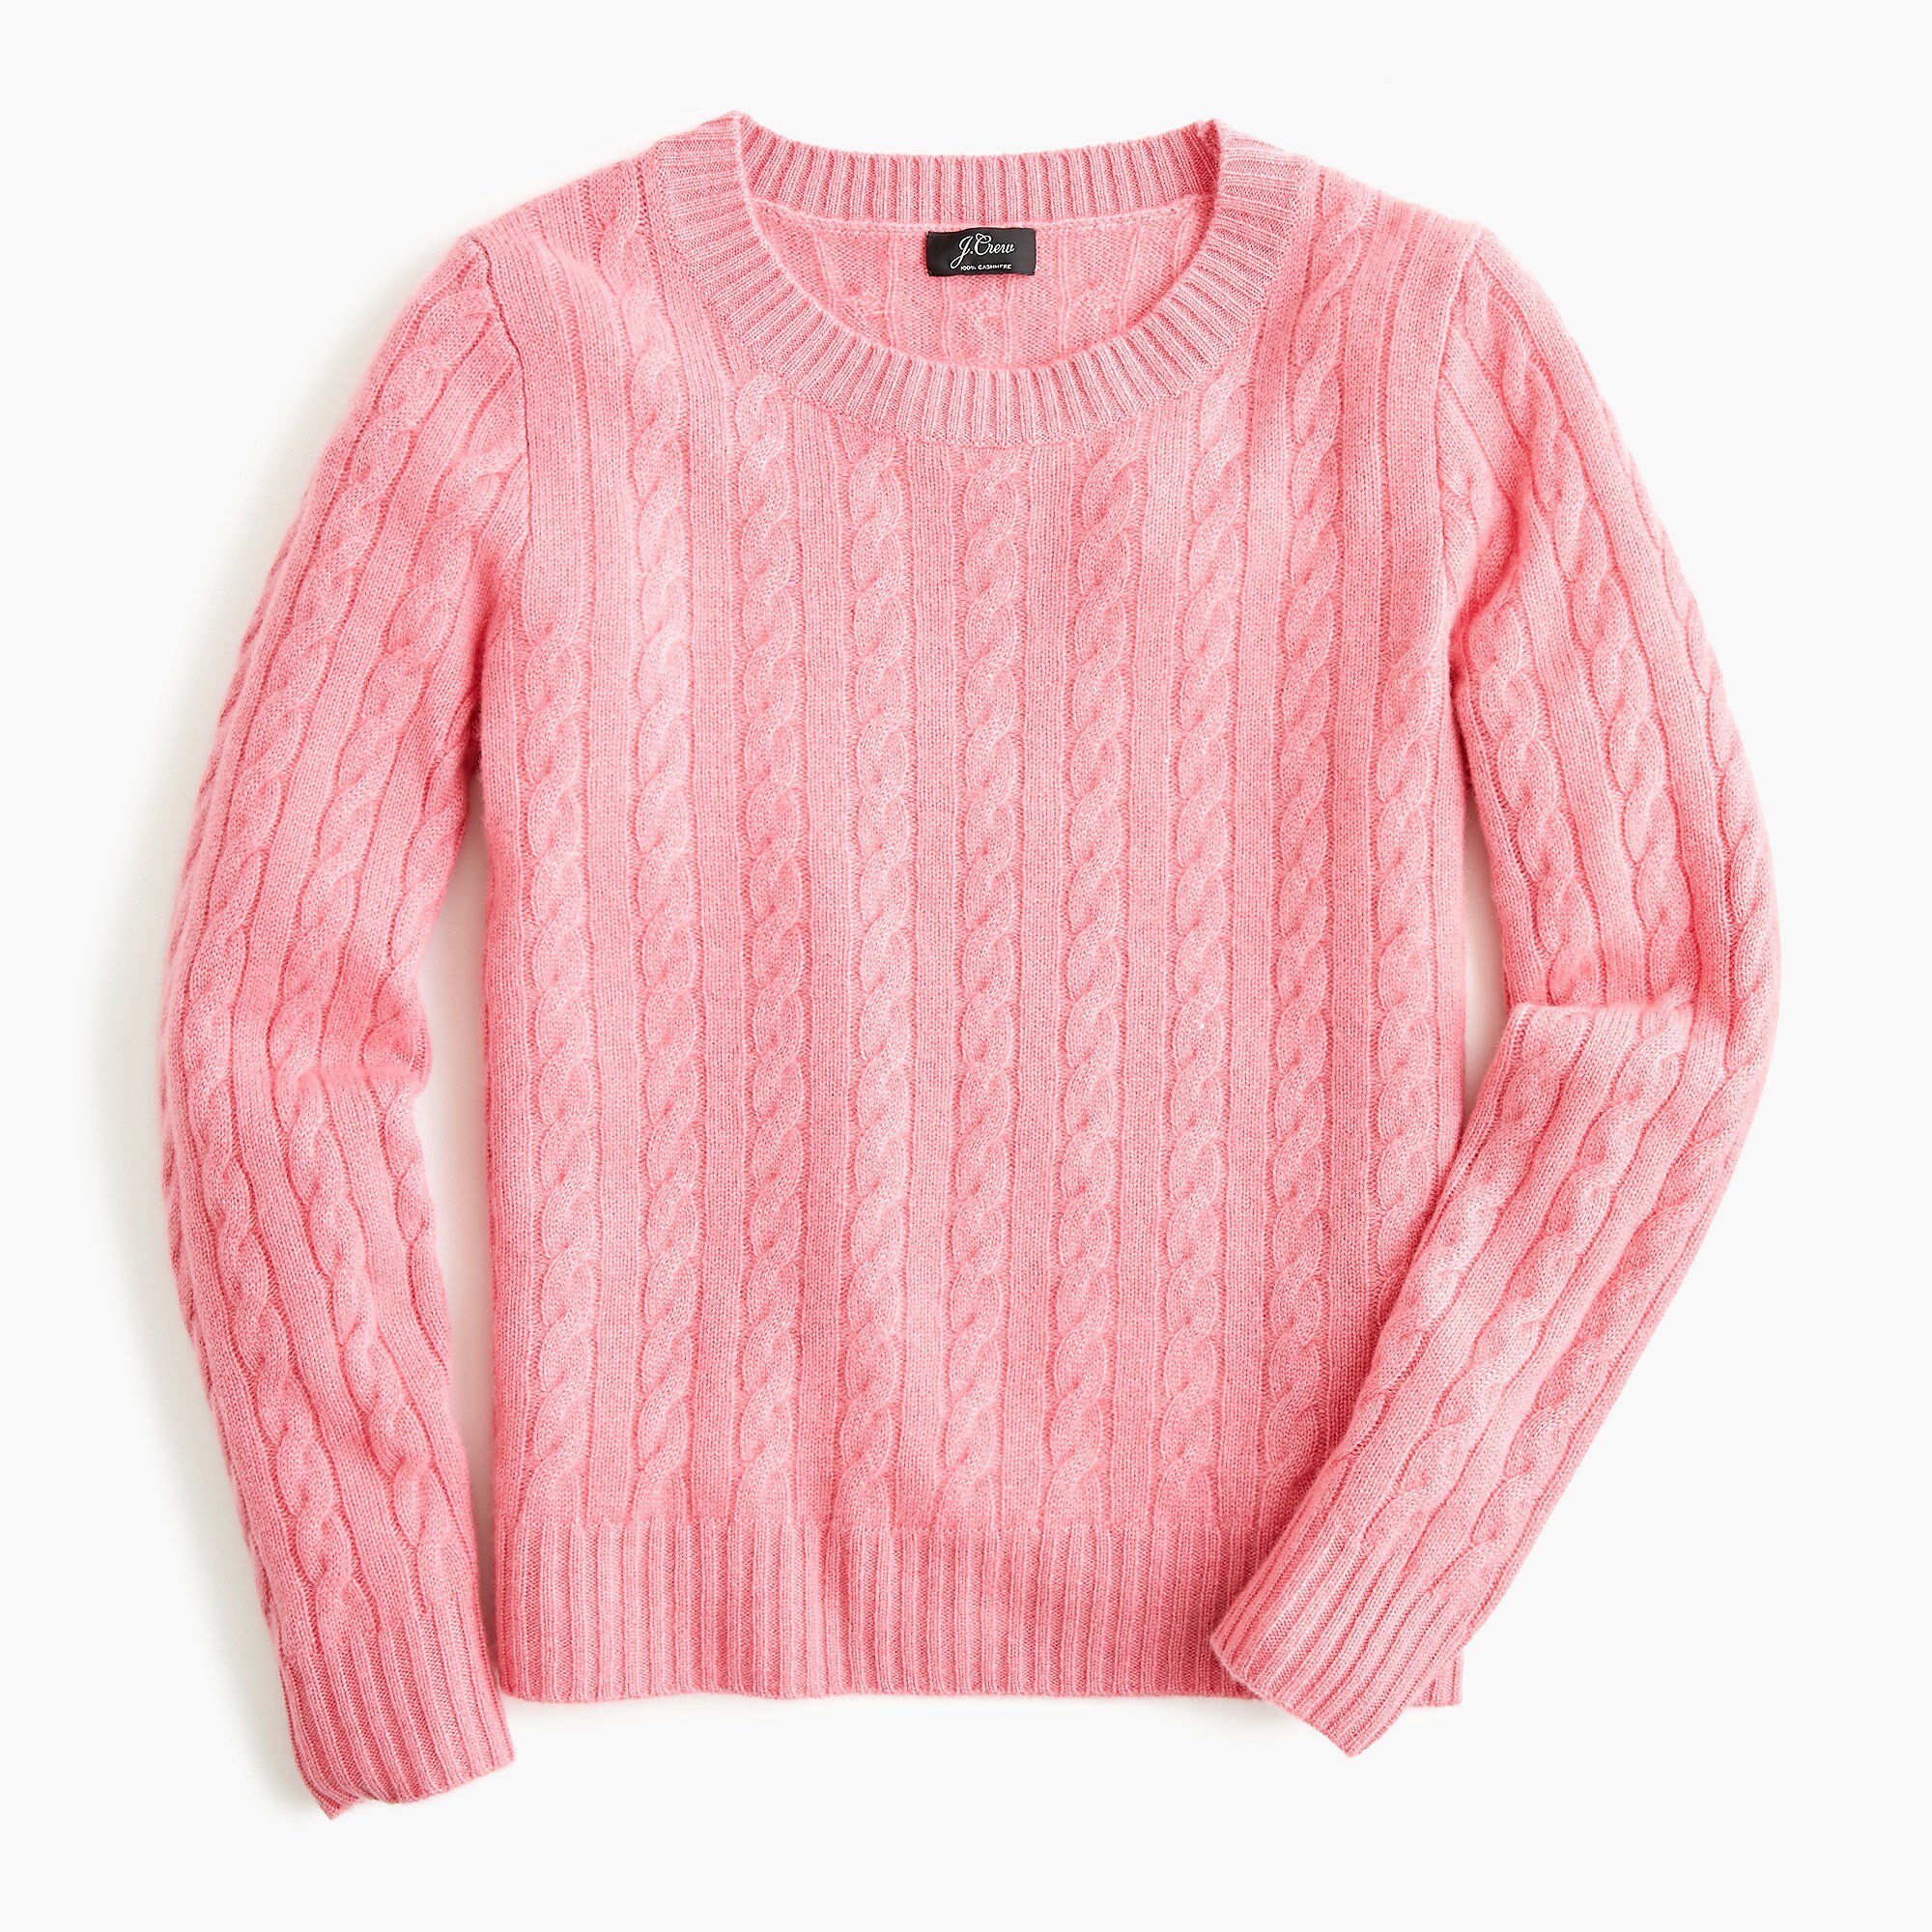 Early Access to J.Crew's Cyber Monday Sale